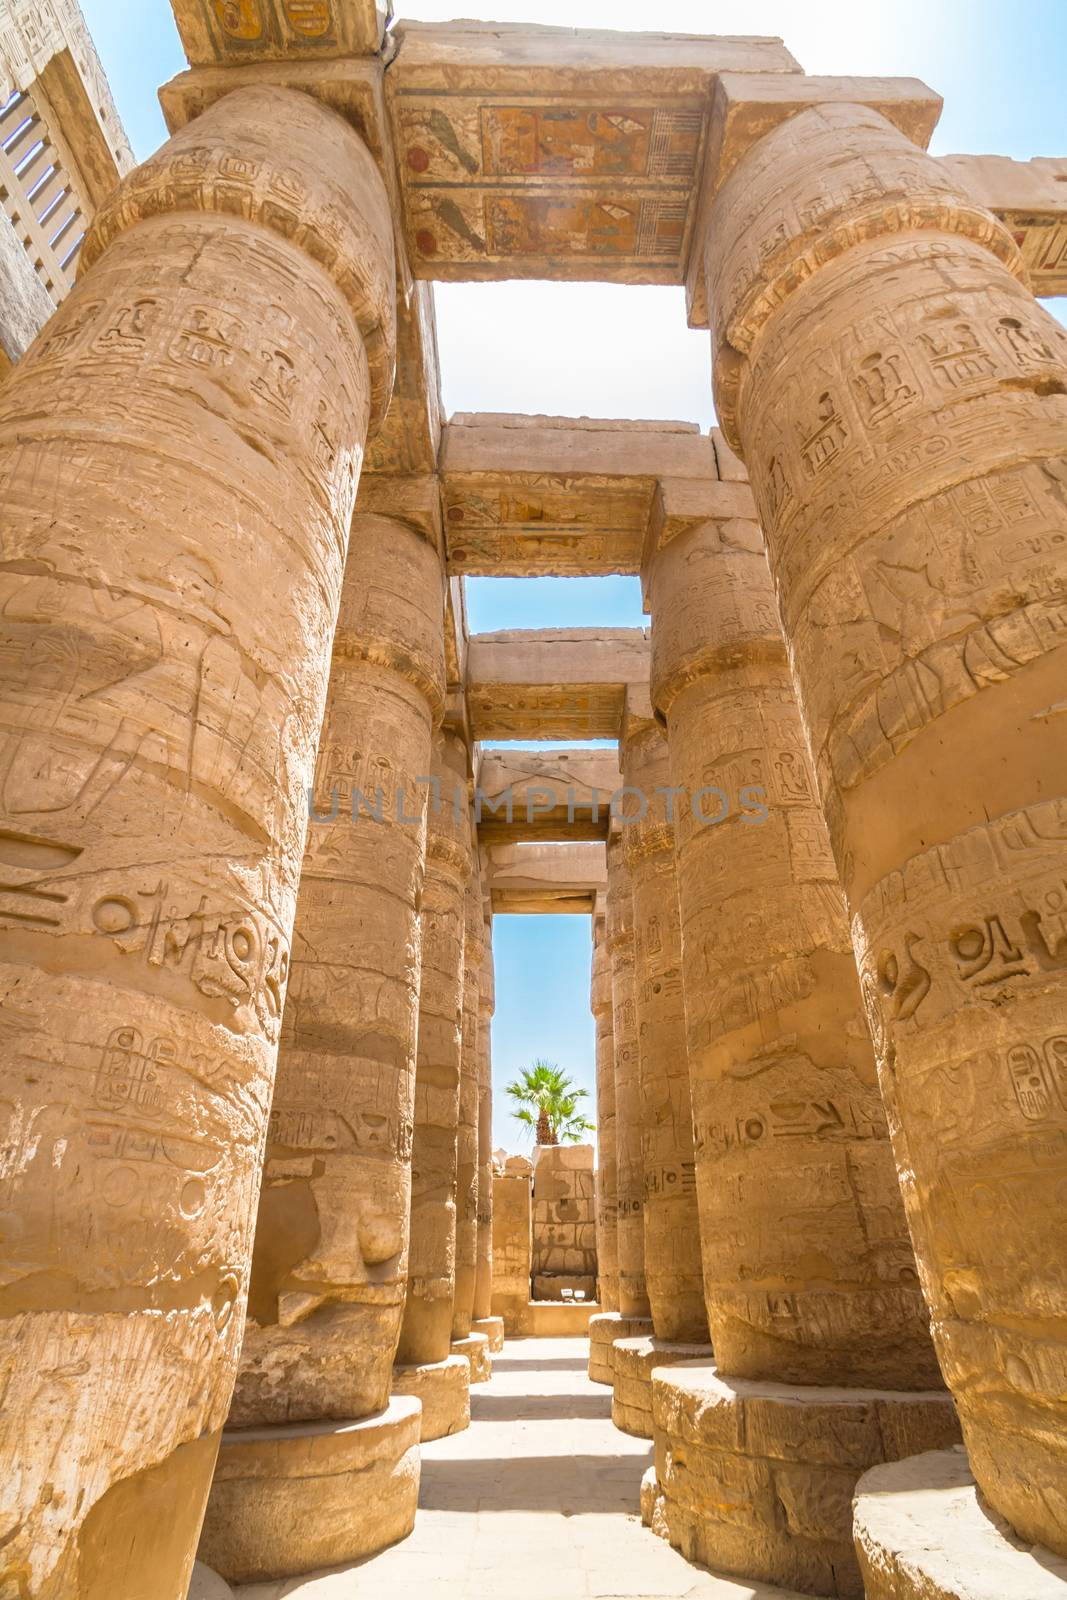 Ancient Egyptian Temple of Karnak (ancient Thebes). Luxor, Egypt.